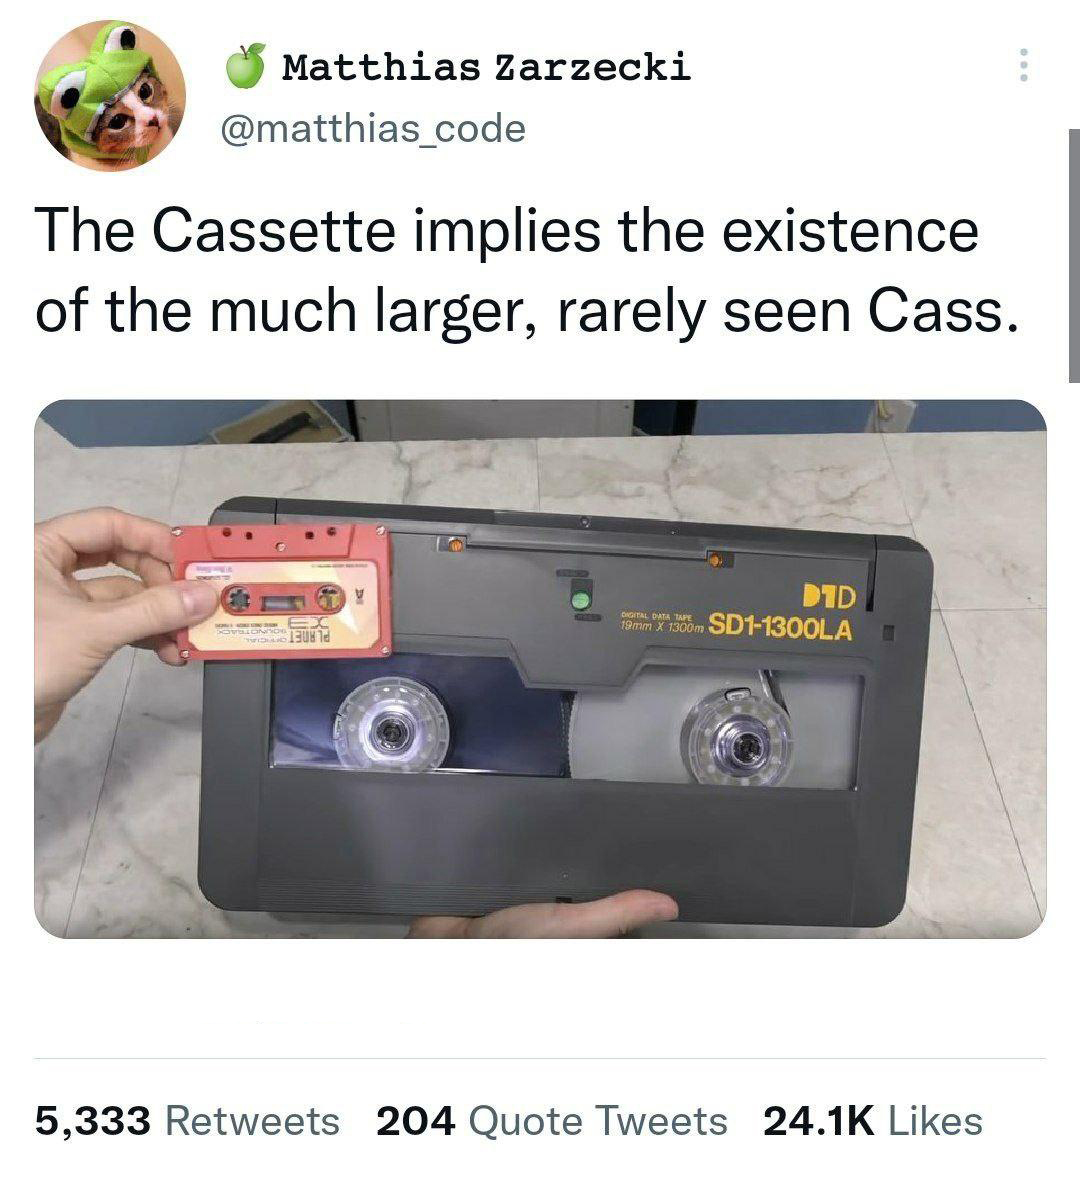 funny pics and memes - cassette and cass - Matthias Zarzecki The Cassette implies the existence of the much larger, rarely seen Cass. Did ismim 1500m SD11300LA Ongital Data Tape Olson 1307 5,333 204 Quote Tweets